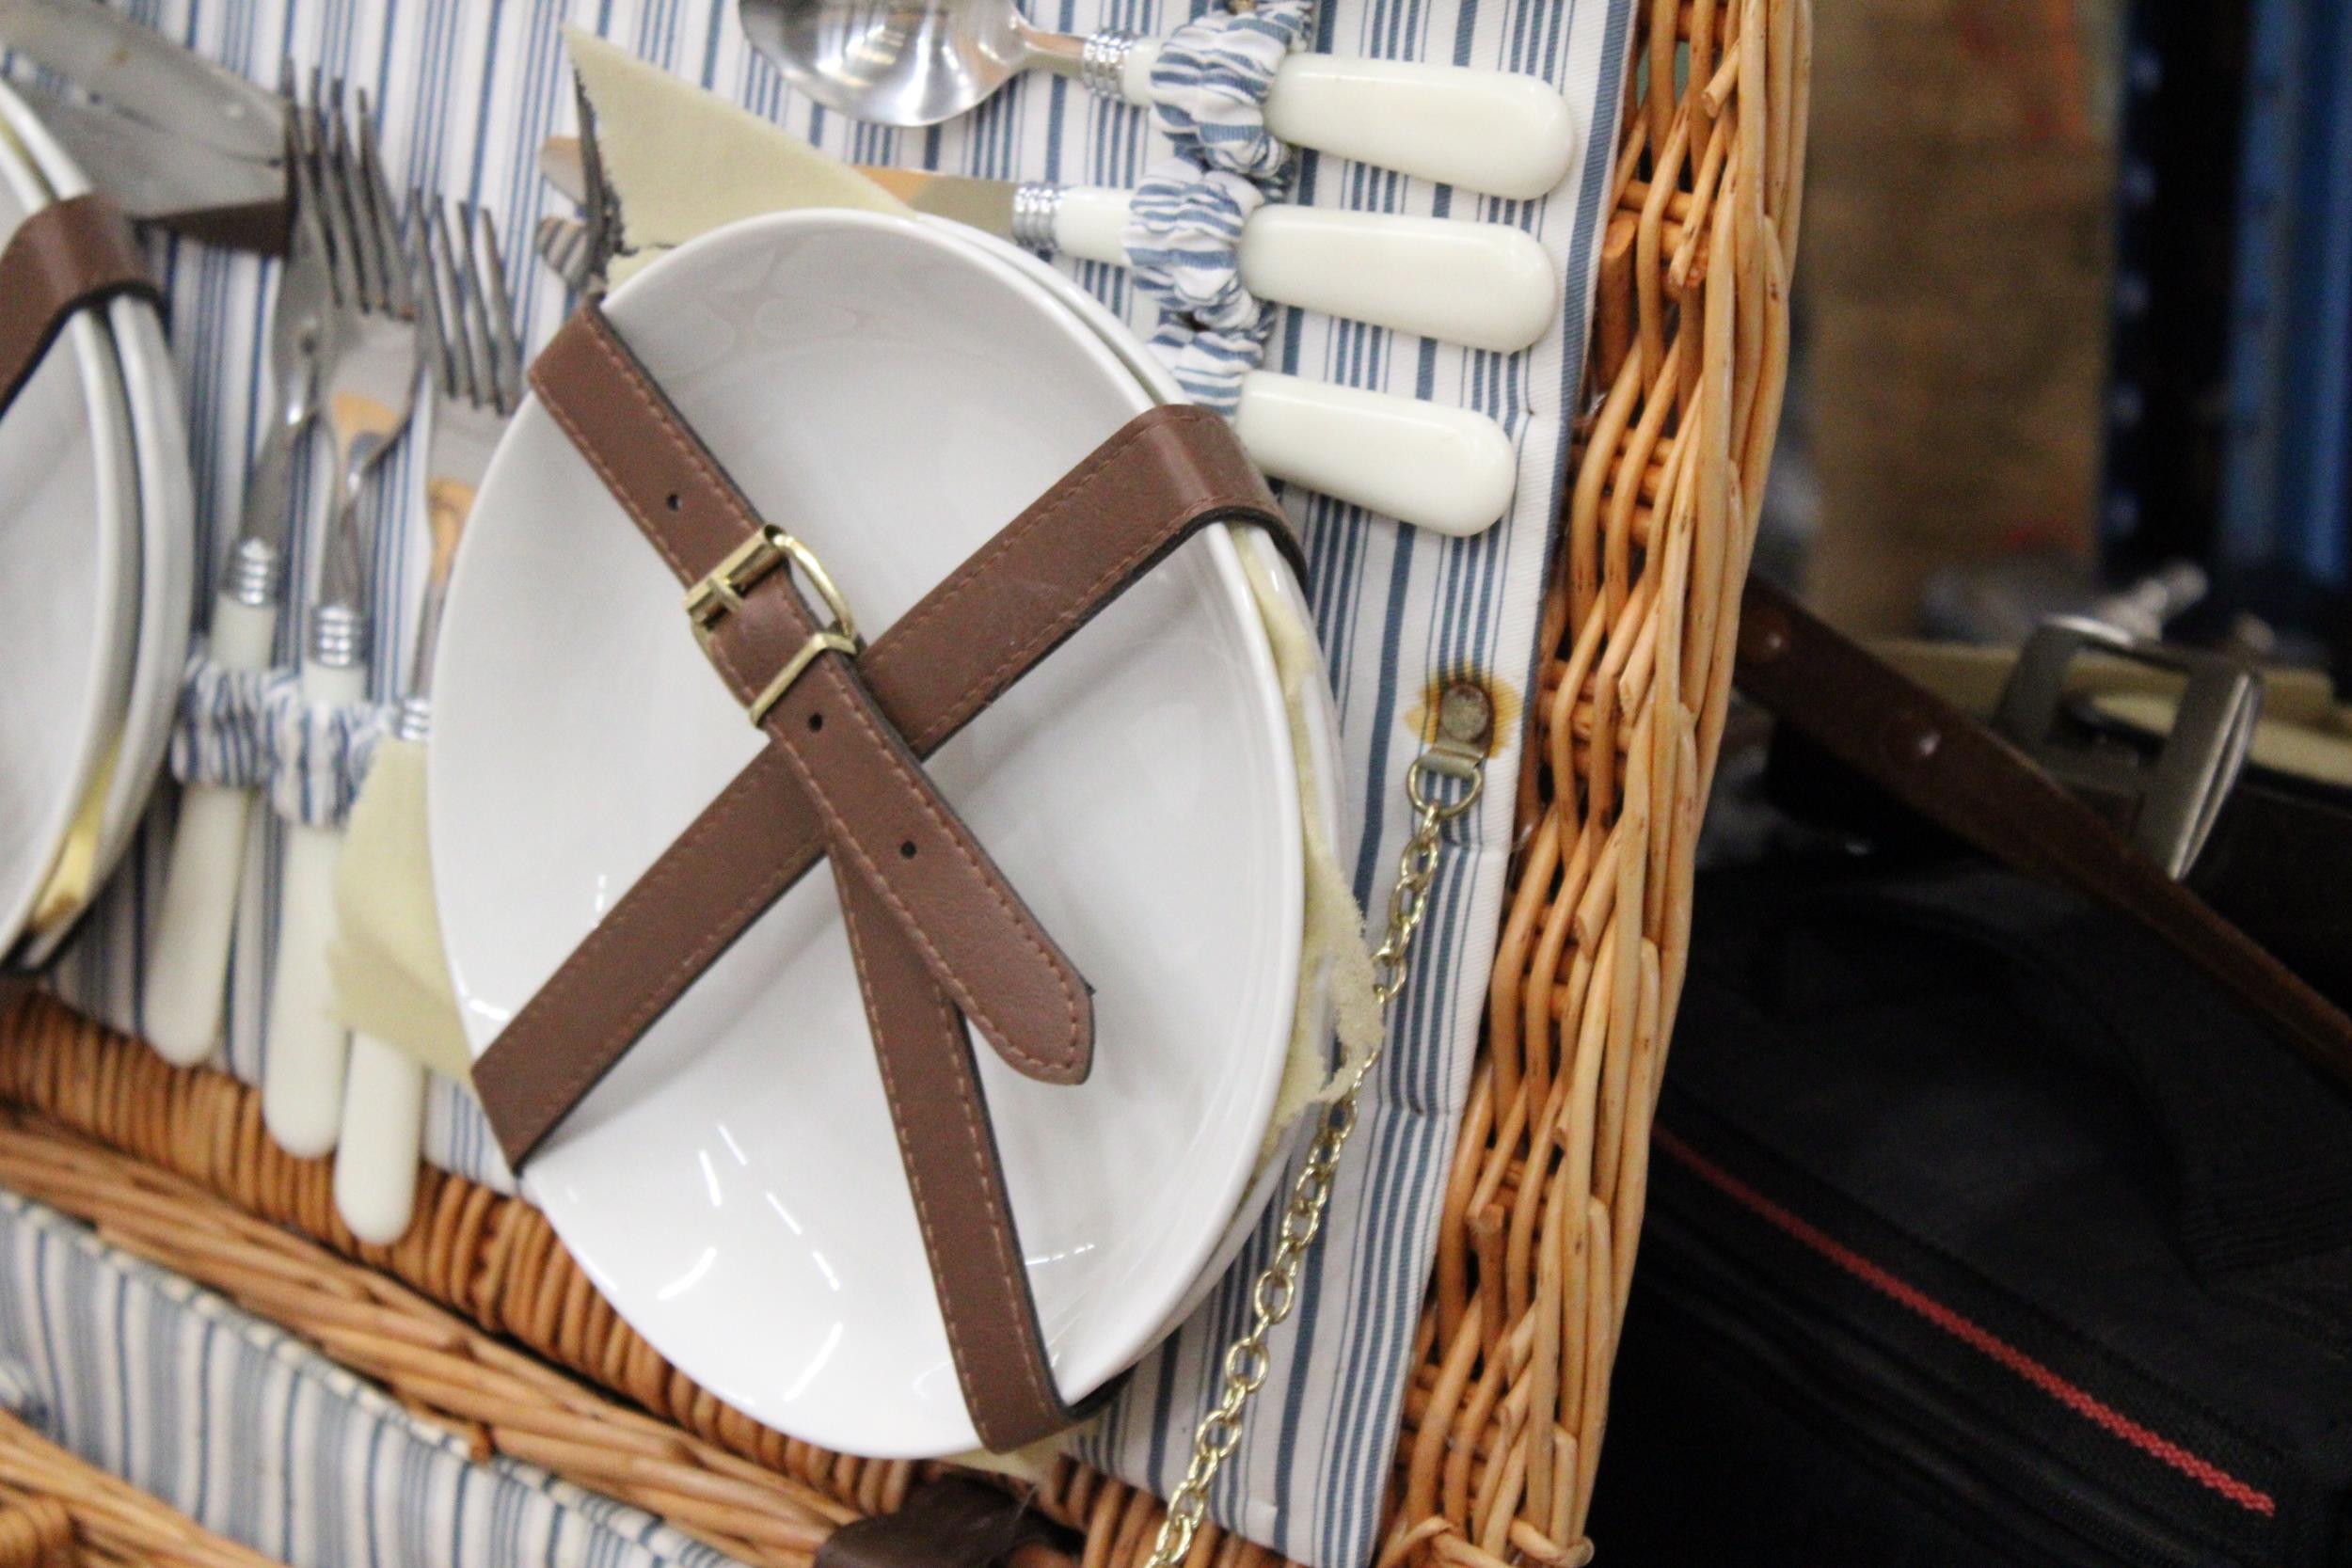 A LARGE WICKER PICNIC HAMPER CONTAINING CERAMIC CUPS AND PLATES, PLUS CUTLERY, A BOTTLE OPENER AND - Image 3 of 5